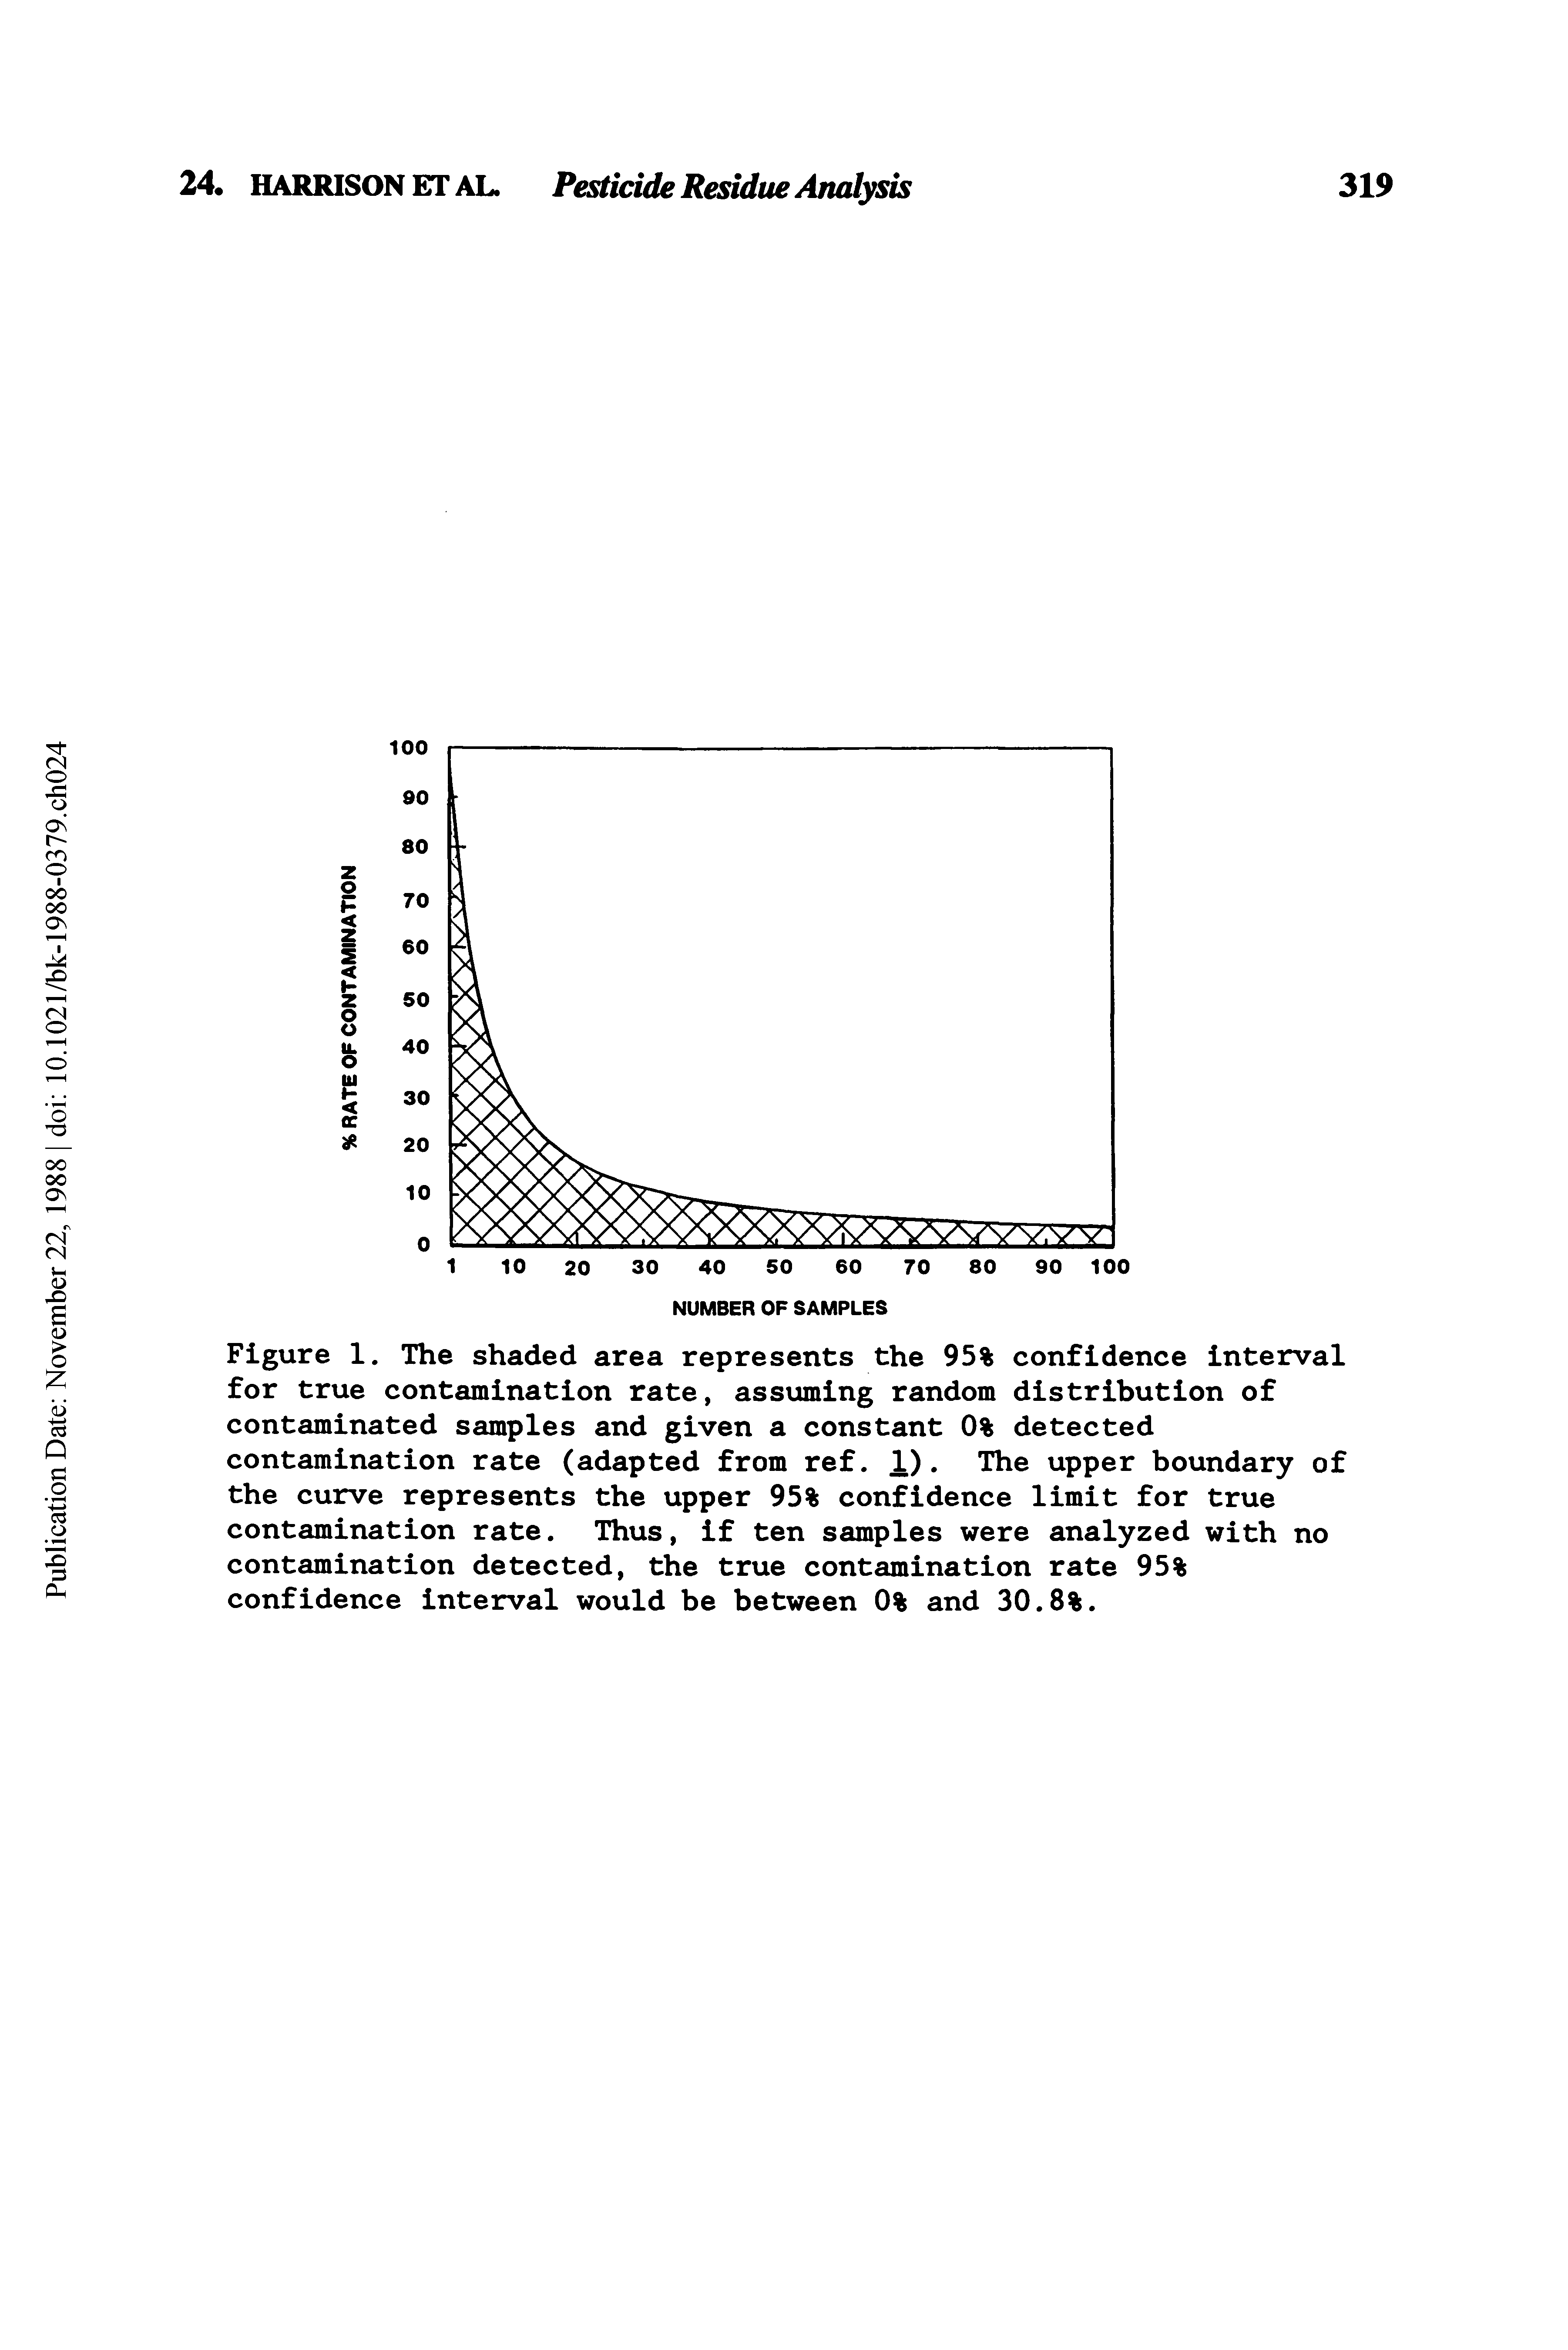 Figure 1. The shaded area represents the 95% confidence interval for true contamination rate, assuming random distribution of contaminated samples and given a constant 0% detected contamination rate (adapted from ref. 1). The upper boundary of the curve represents the upper 95% confidence limit for true contamination rate. Thus, if ten samples were analyzed with no contamination detected, the true contamination rate 95% confidence interval would be between 0% and 30.8%.